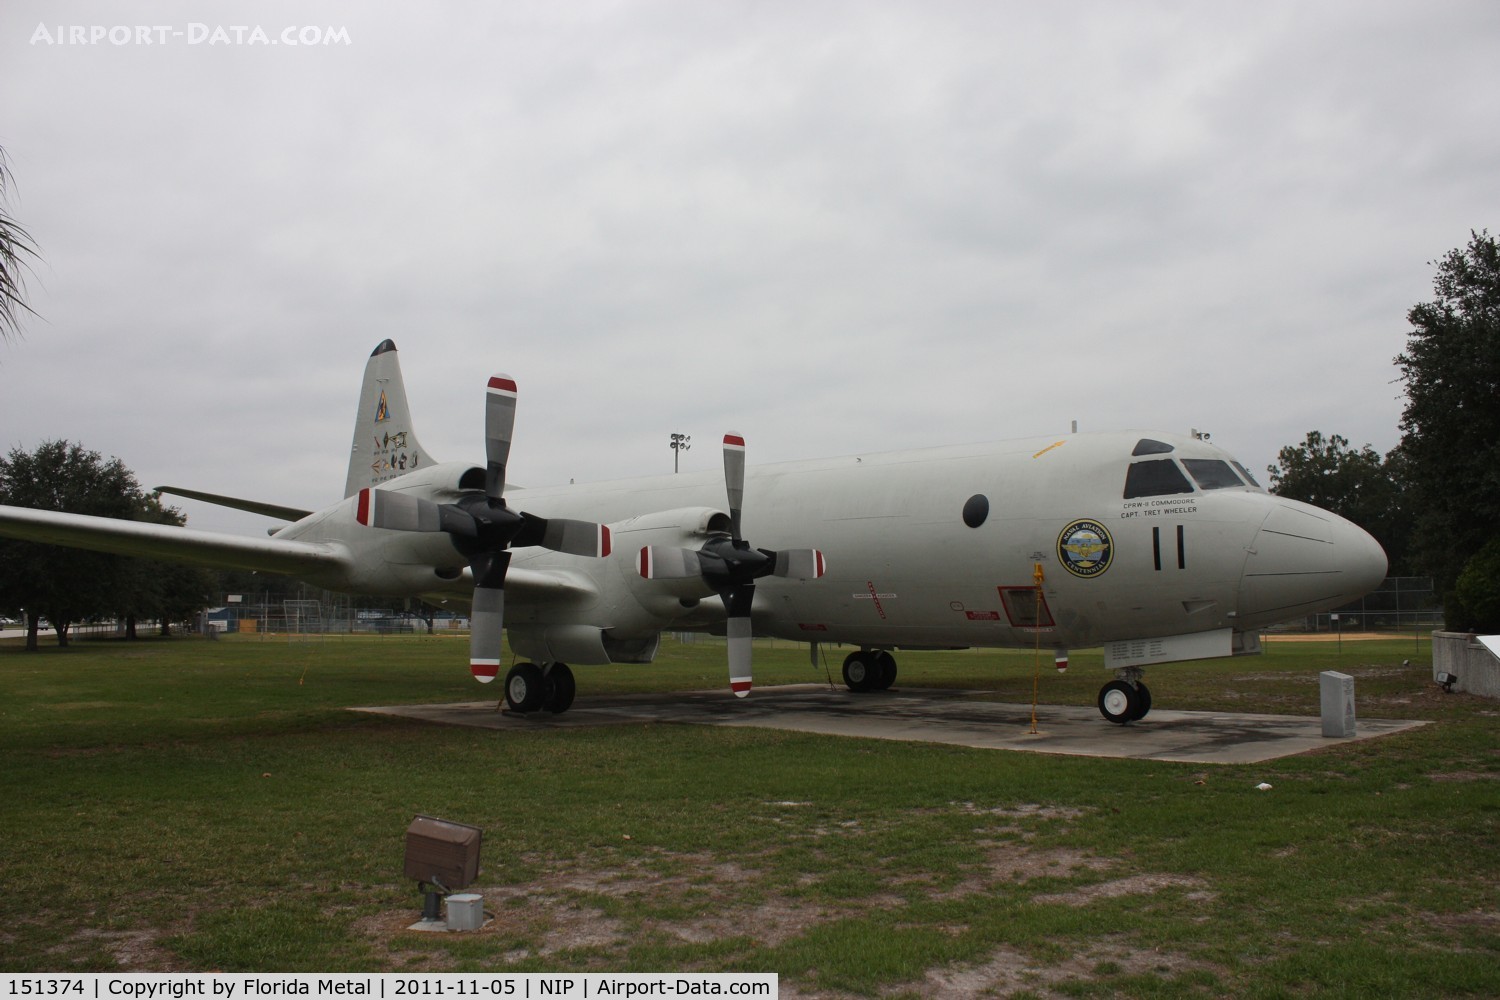 151374, 1964 Lockheed P-3A Orion C/N 185-5087, P-3A Orion